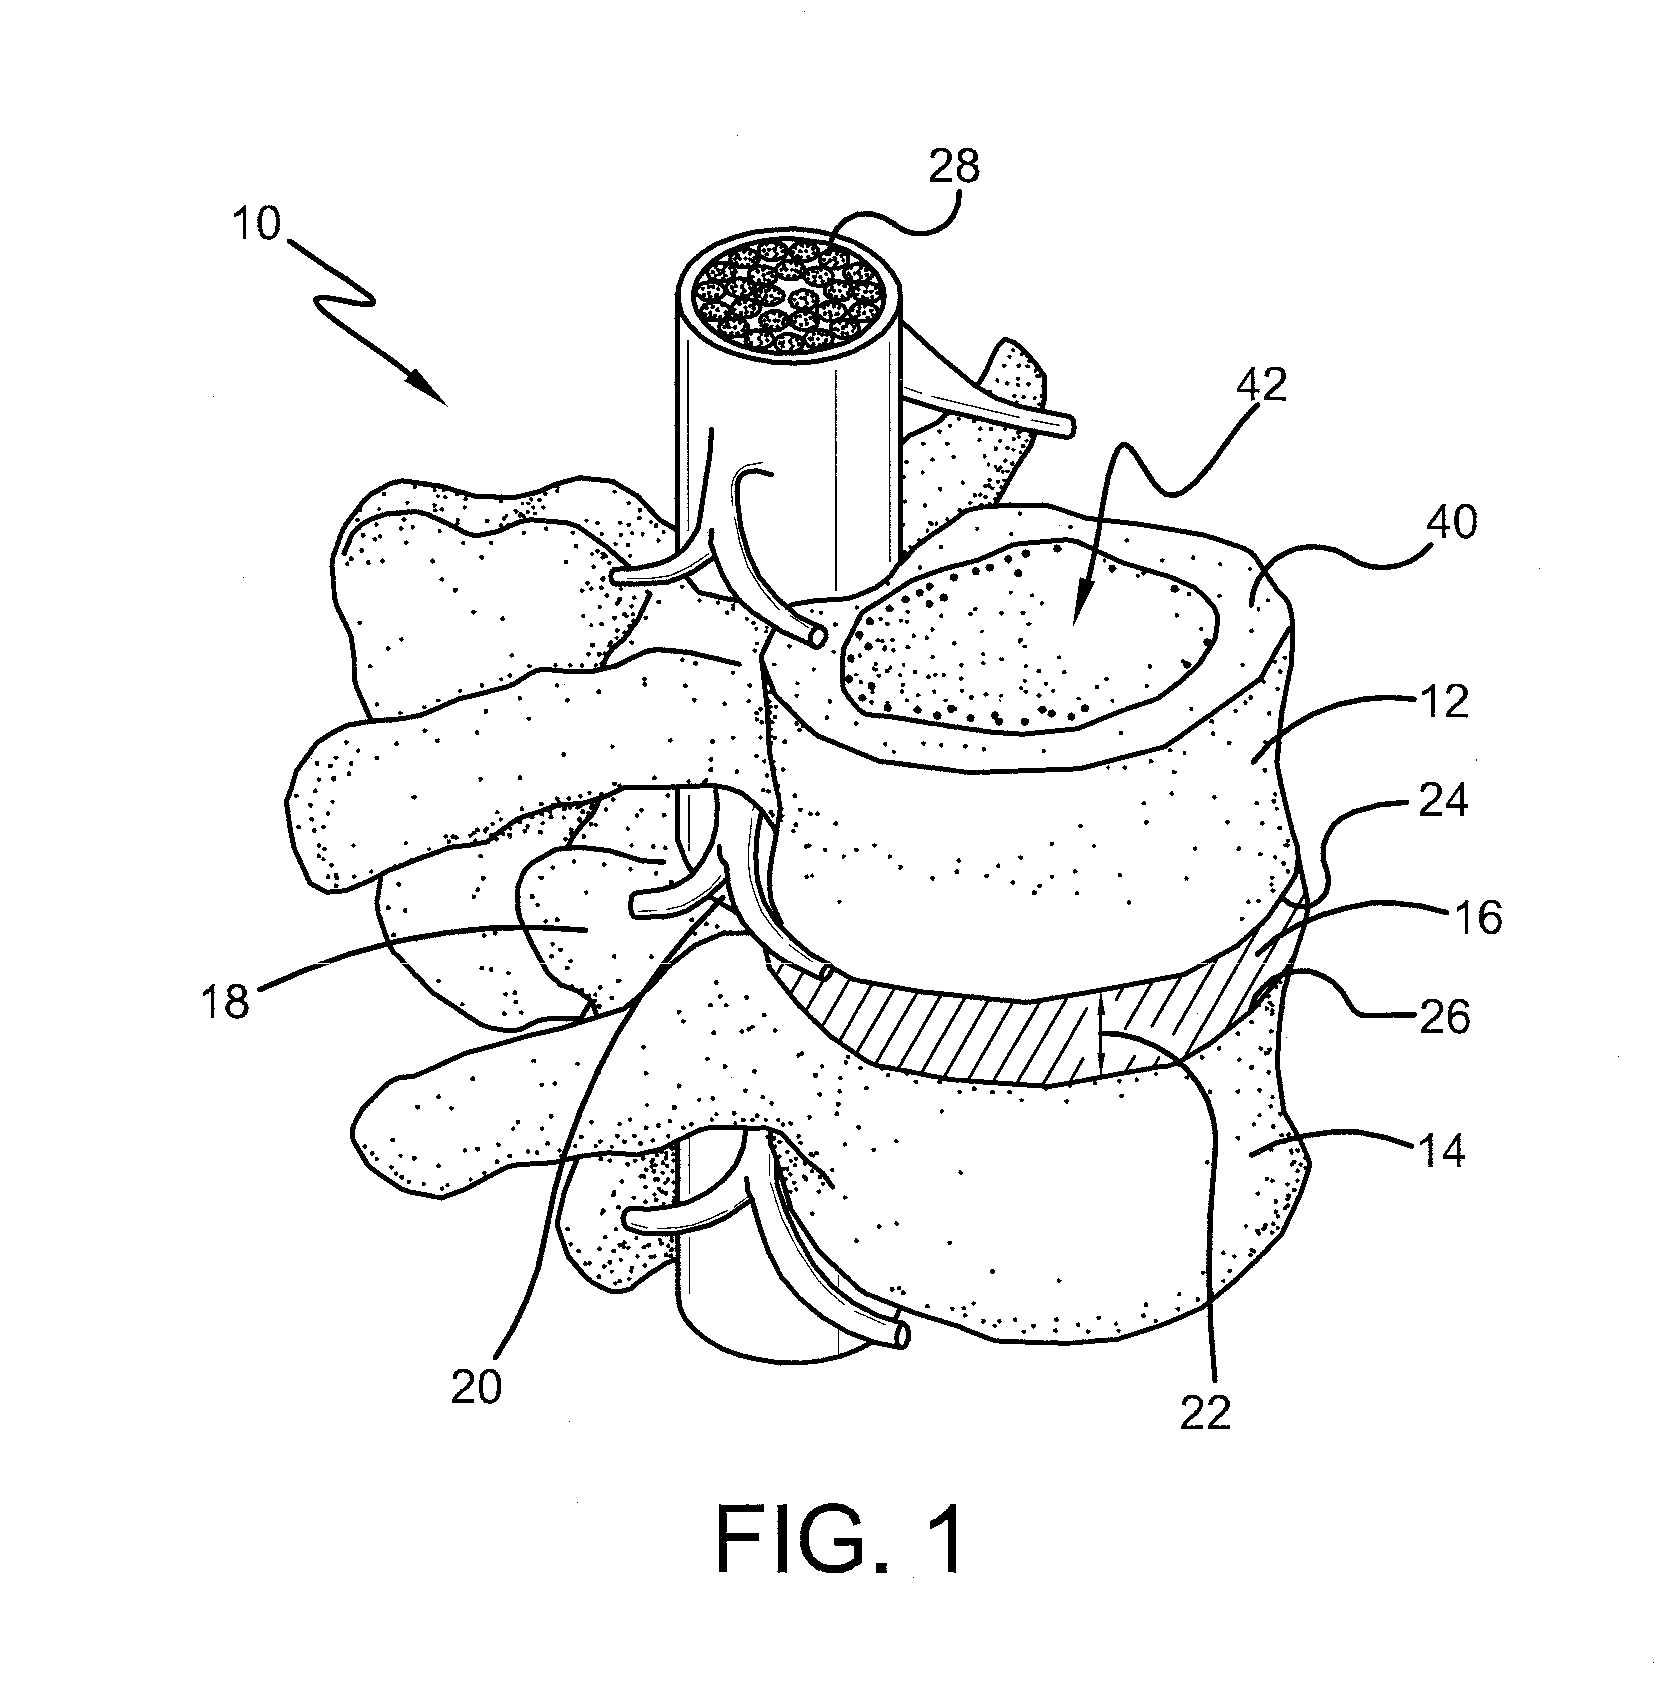 Spine surgery method and implant deployment